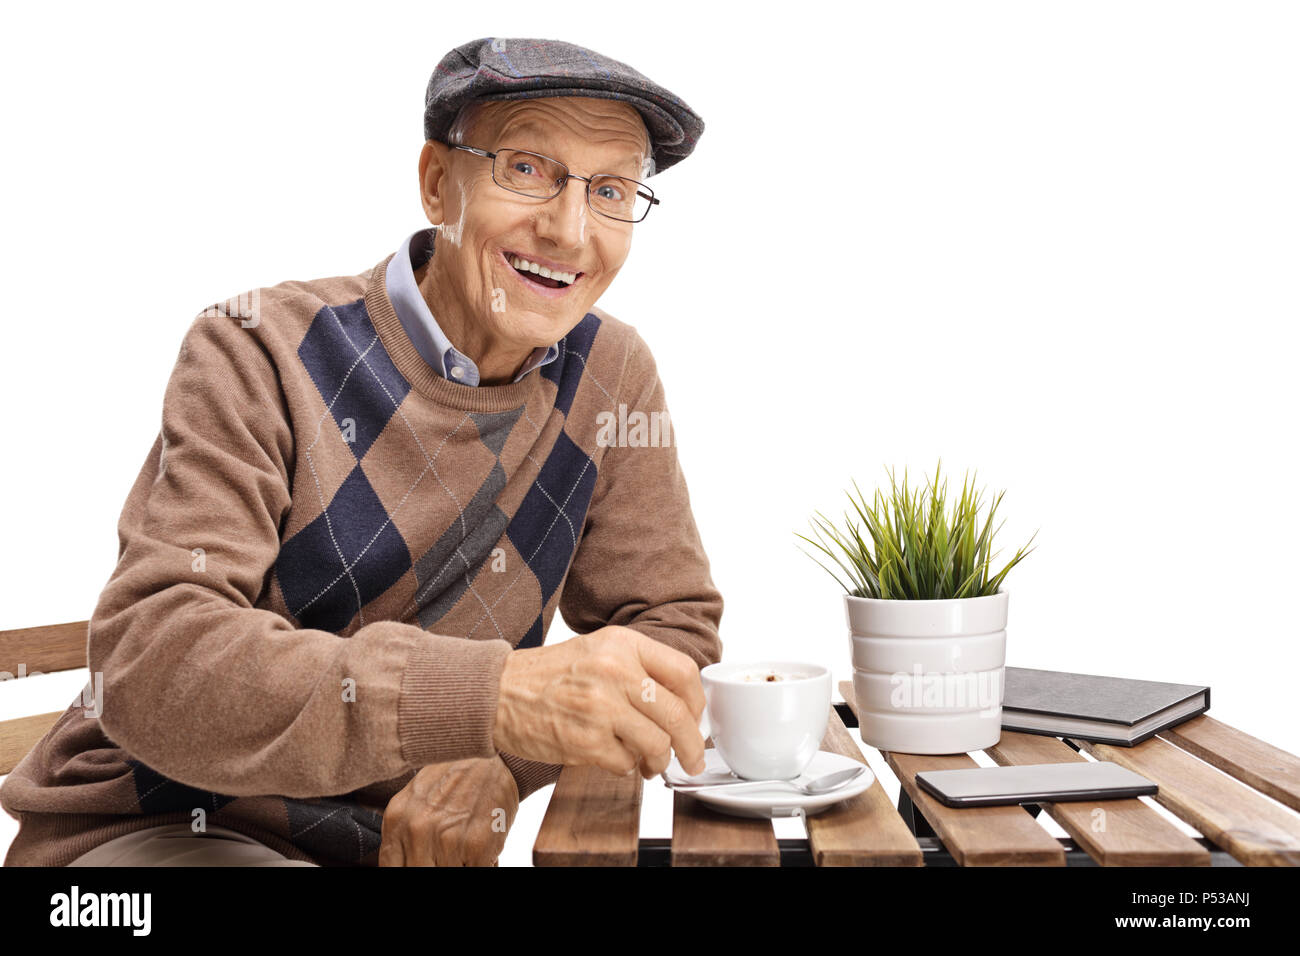 Elderly man sitting at a coffee table and smiling isolated on white background Stock Photo